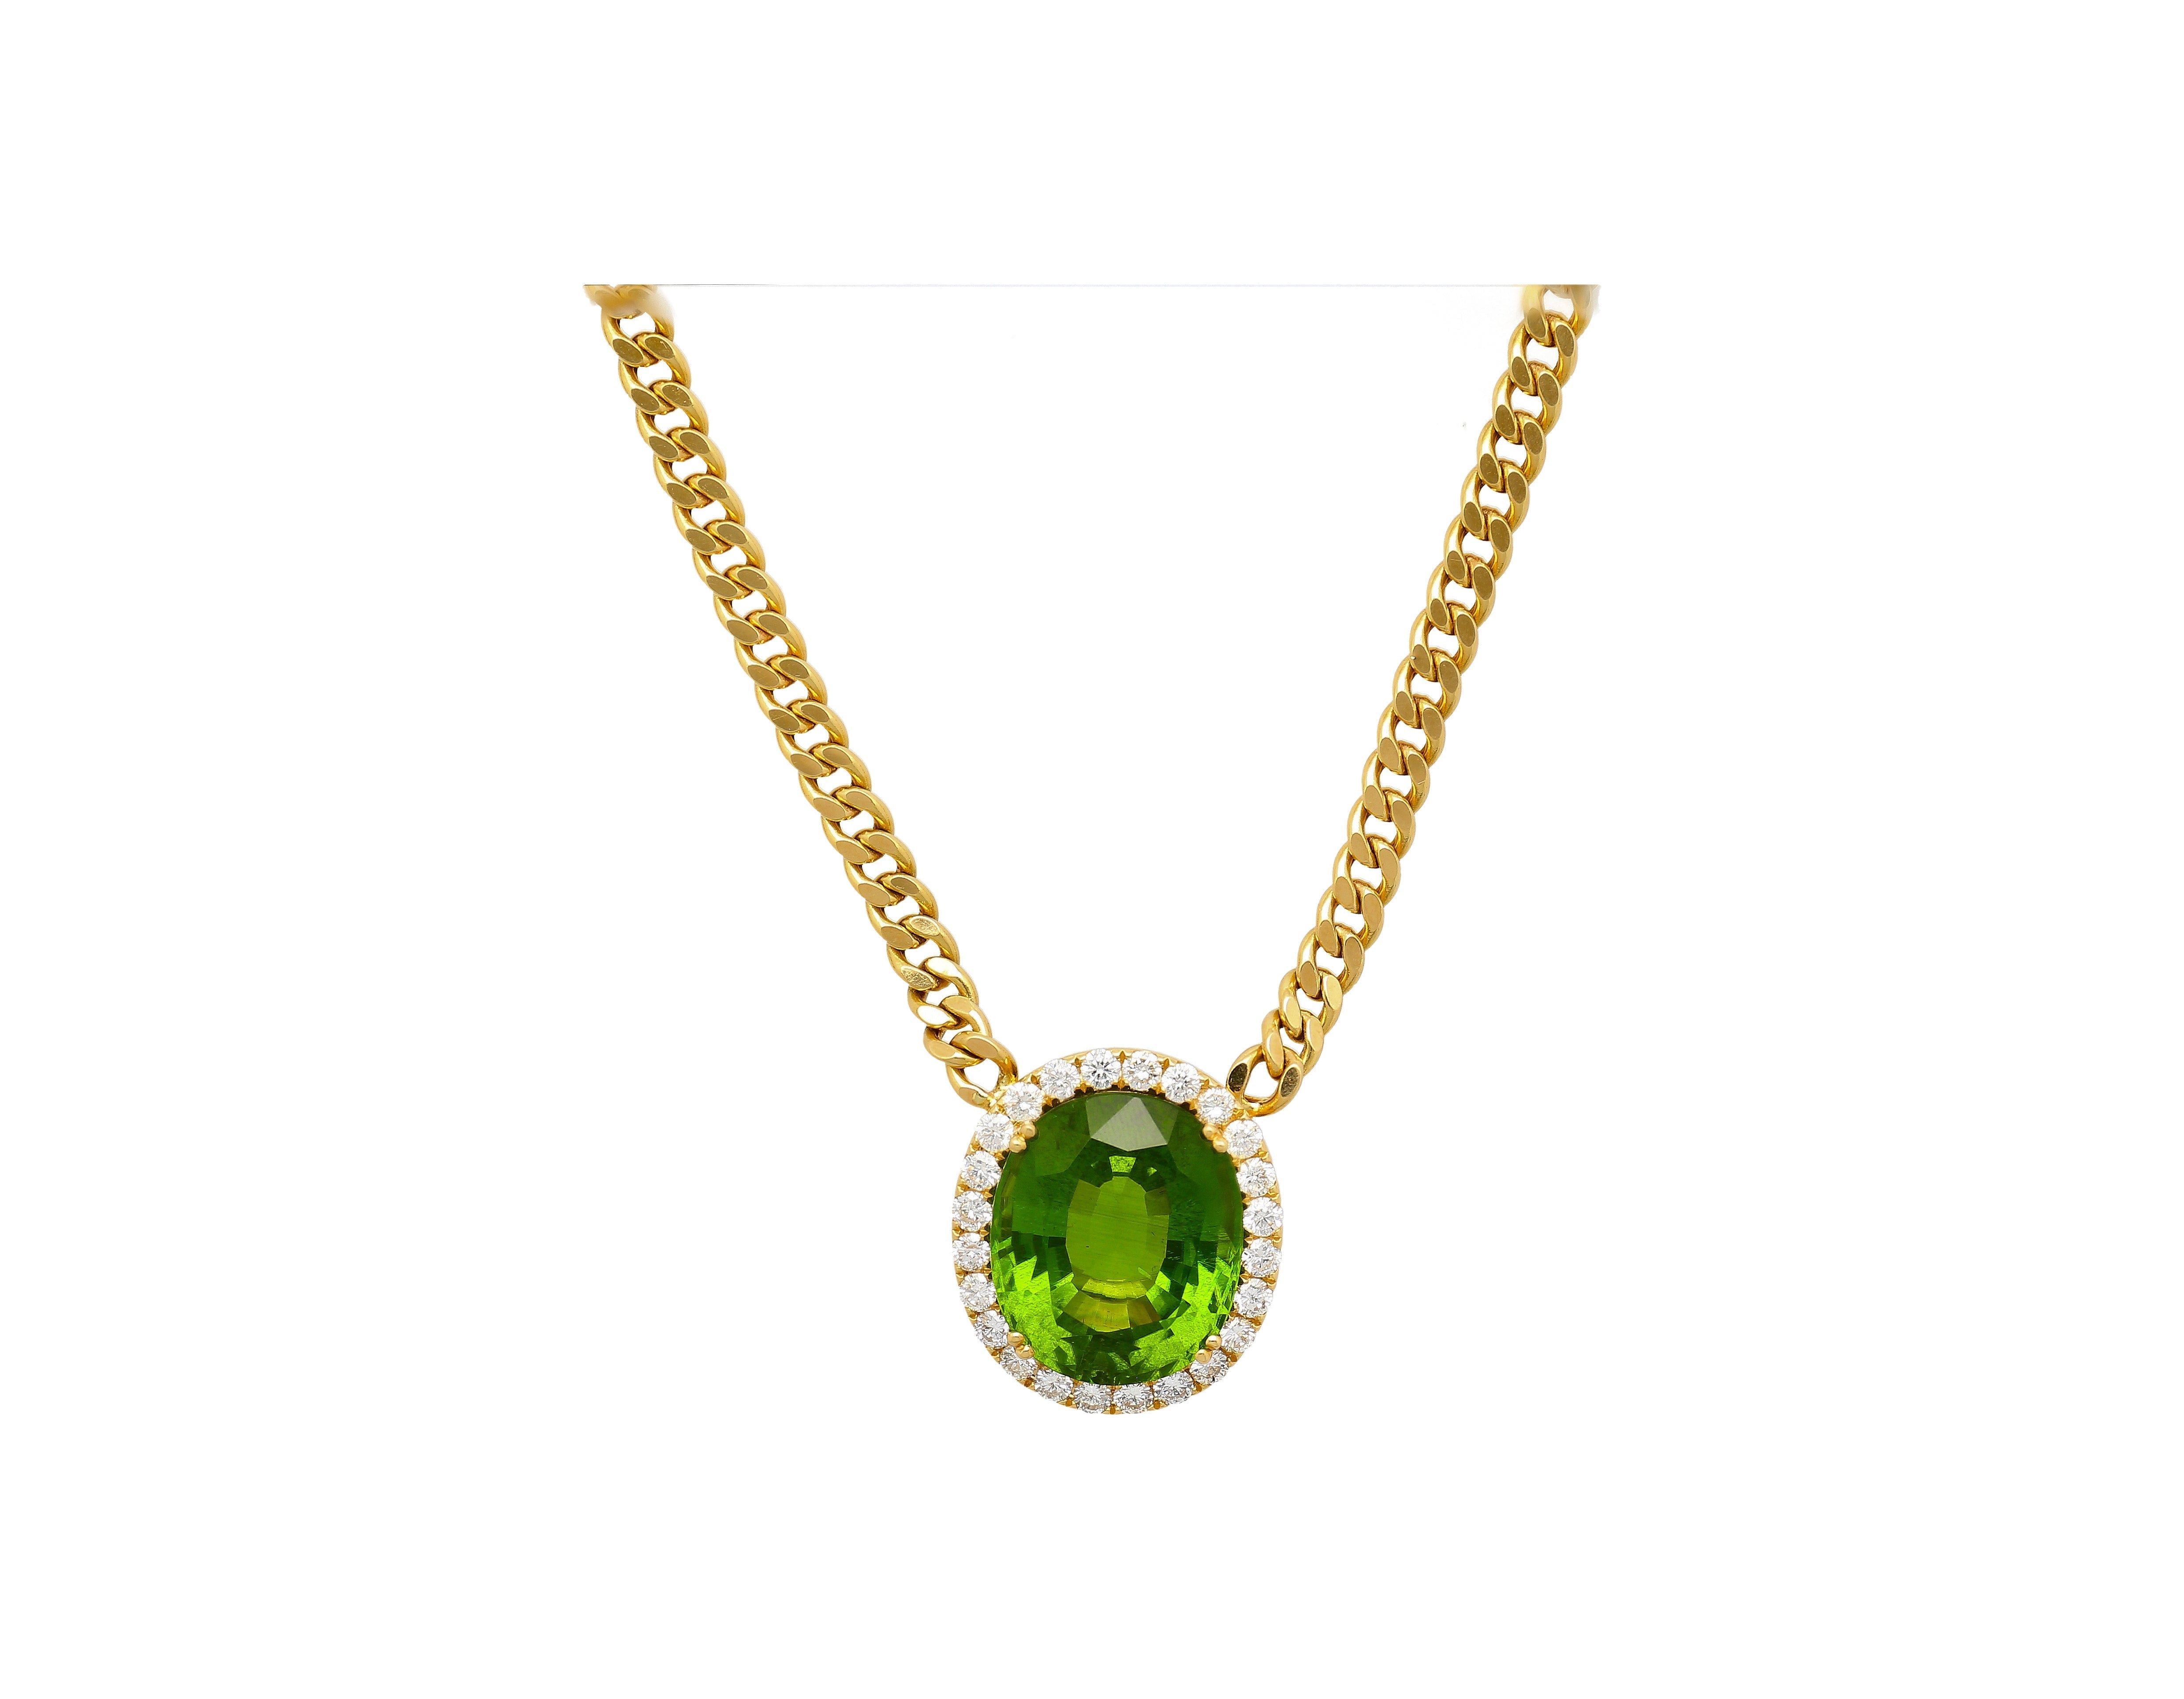 GRS-Certified-51-carat-Green-Oval-Cut-Peridot-with-Diamond-Halo-in-18K-Gold-Cuban-Chain-Setting-Pendant-Necklace-Necklace.jpg